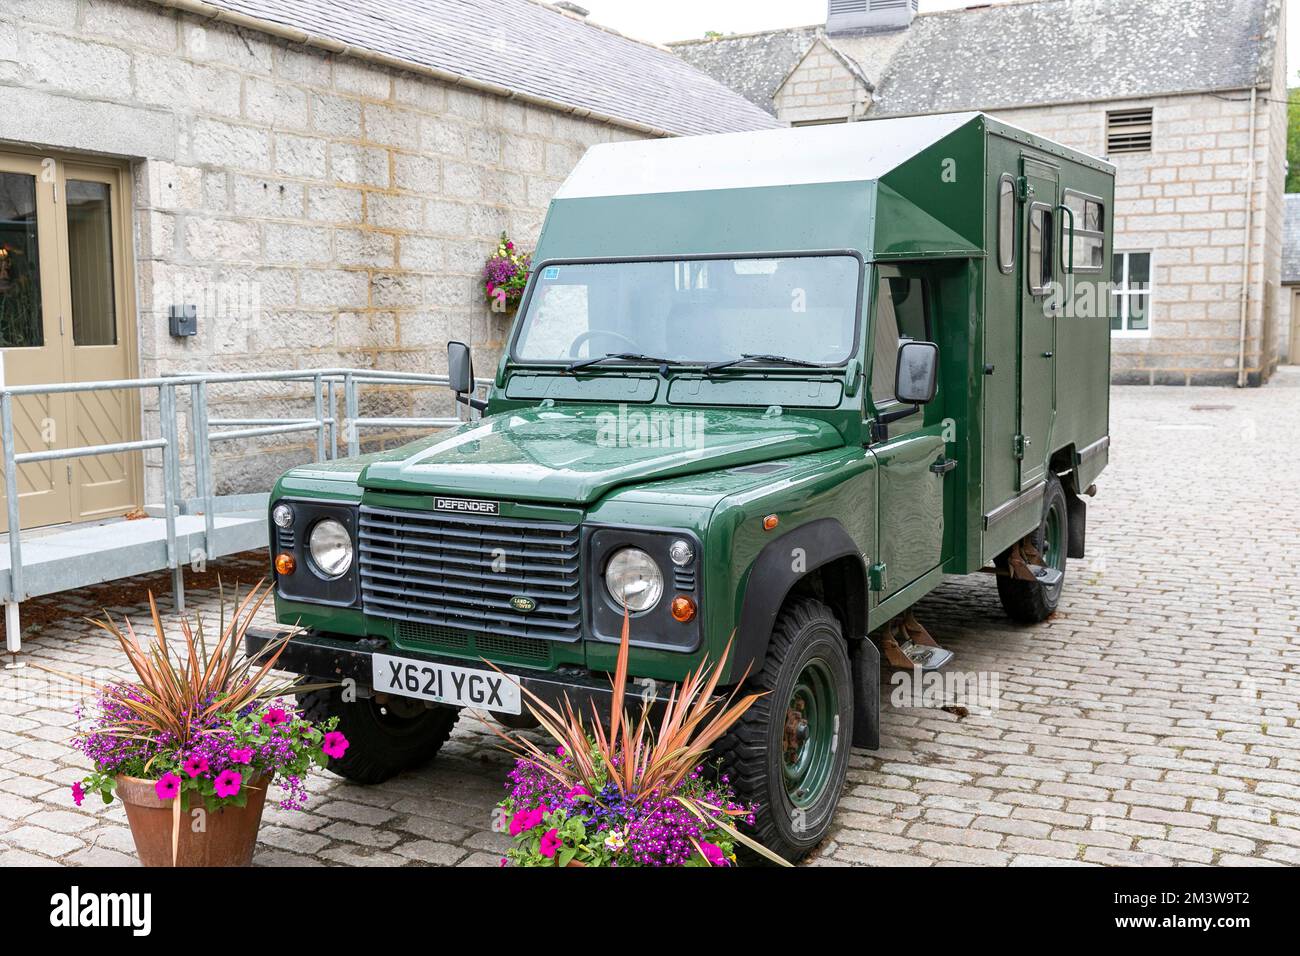 Balmoral Castle grounds and green modified Land Rover Defender part of the Queen Elizabeth 11 fleet of cars vehicles Stock Photo